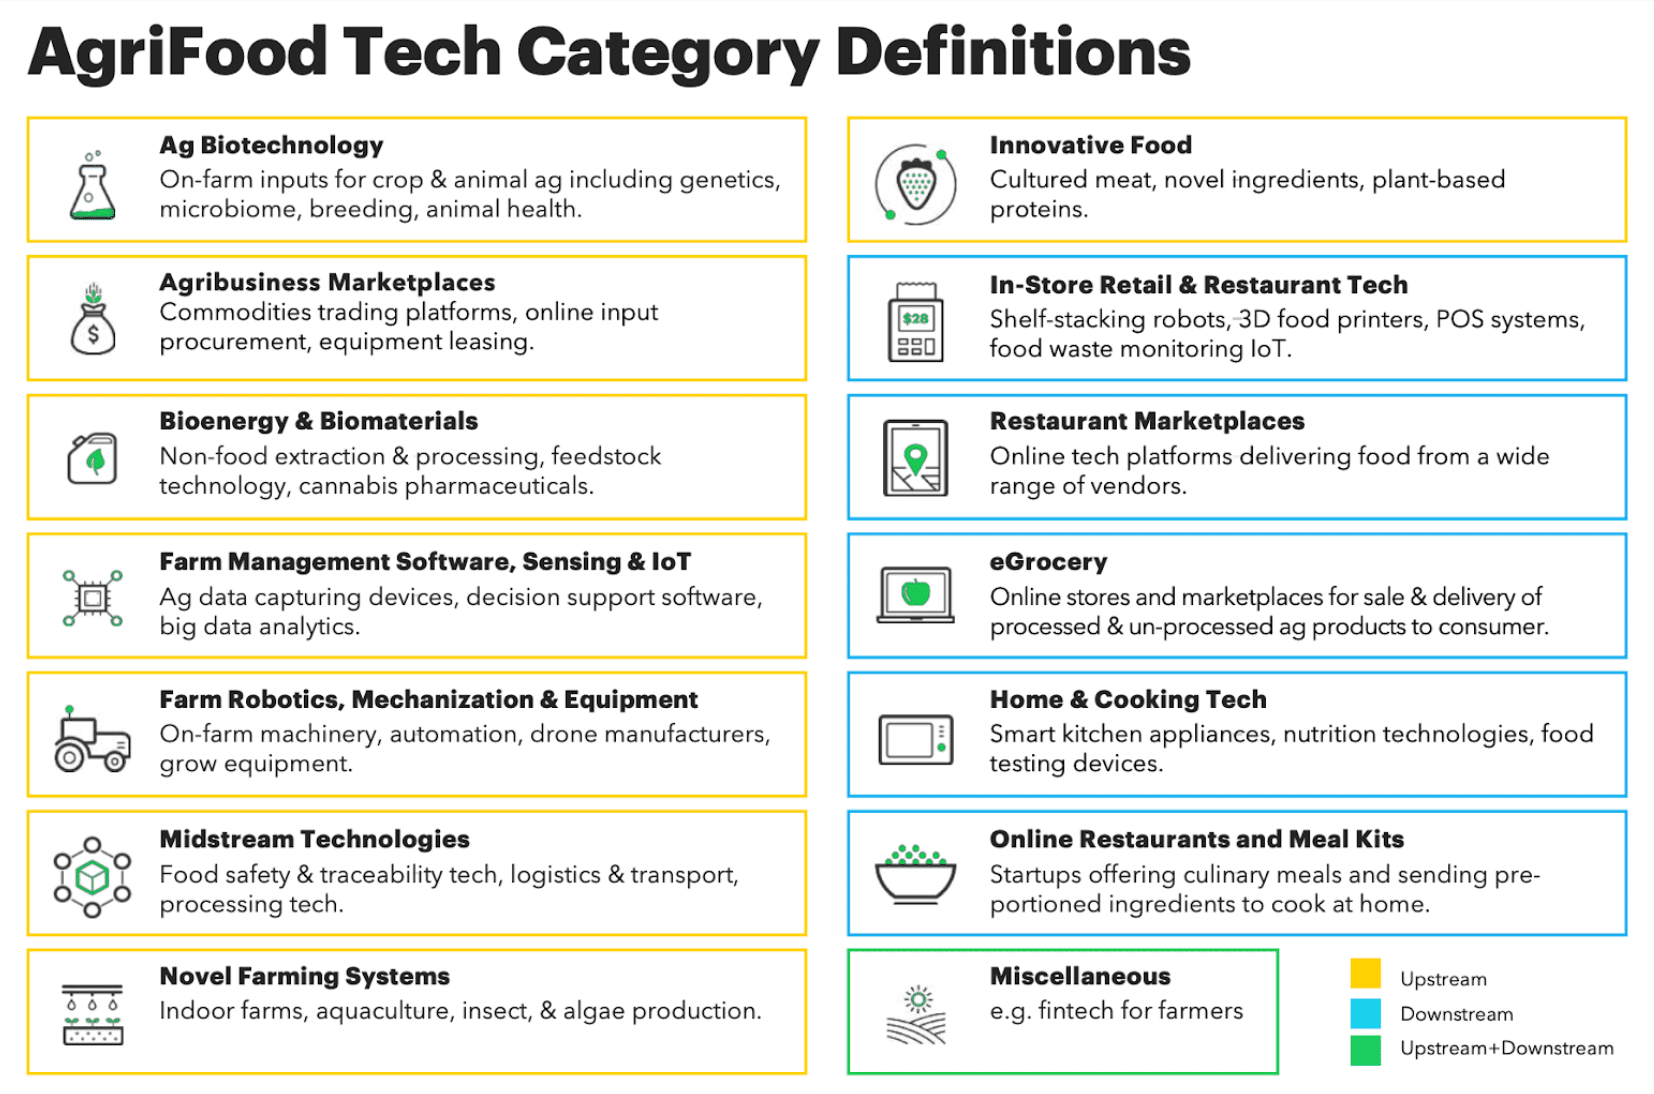 AgriFood Tech Category Definitions